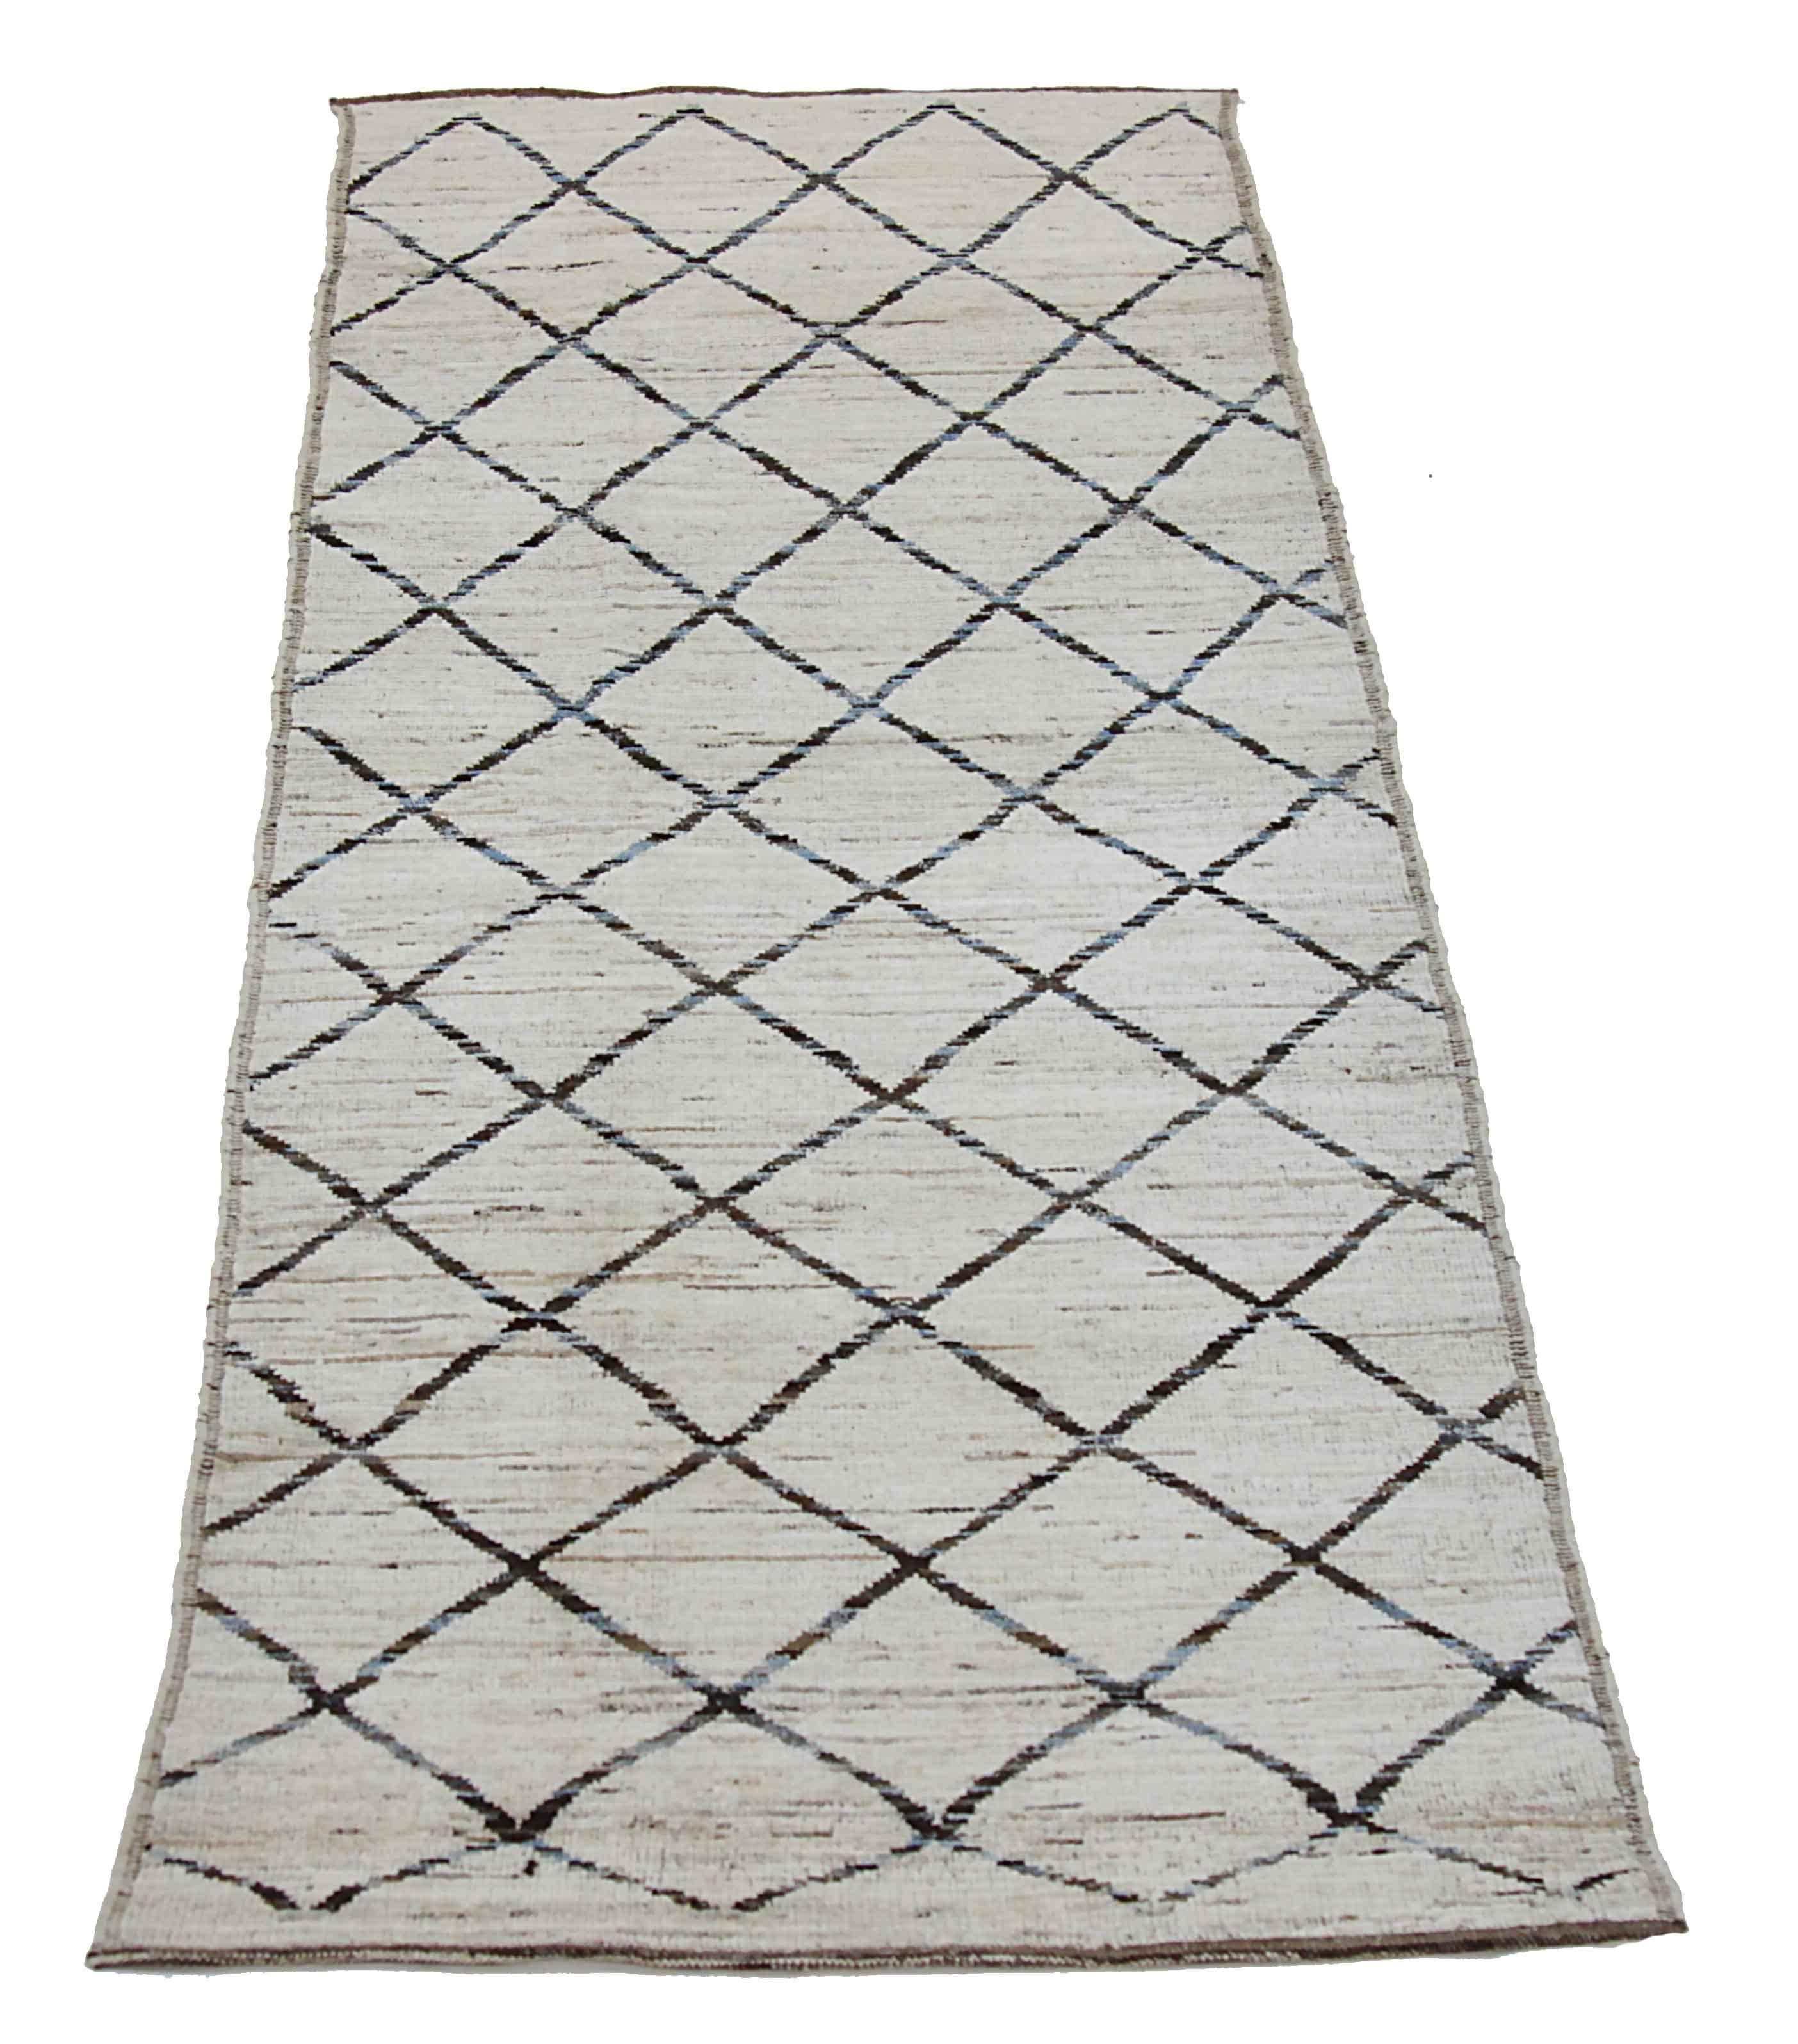 Modern Afghan runner rug handwoven from the finest sheep’s wool. It’s colored with all-natural vegetable dyes that are safe for humans and pets. This piece is a traditional Afghan weaving featuring a Moroccan inspired design. It’s highlighted by